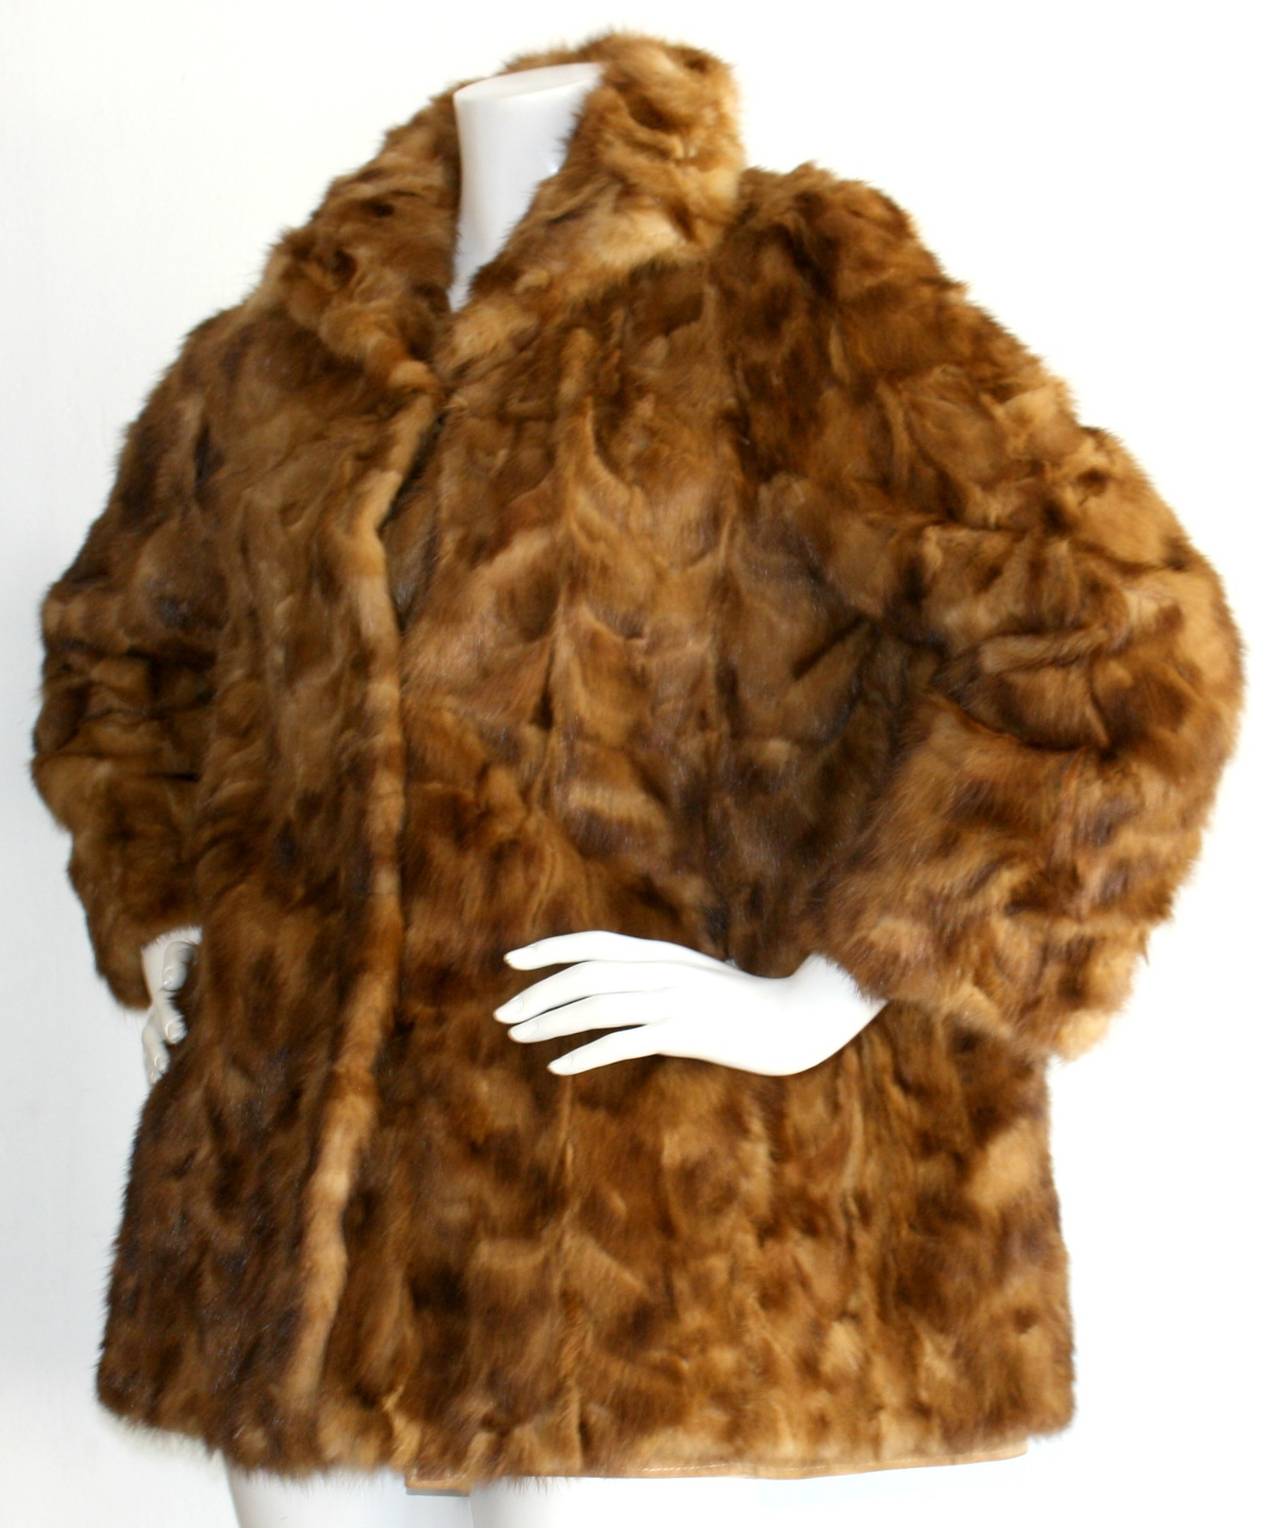 Extremely rare vintage Fendi reversible Mink Coat! Beautiful caramel honey color. Swing jacket style, that reverses to a tan suede, with pockets at waist on both mink and suede side. Can be closed on either side with three heavy duty hidden clasps